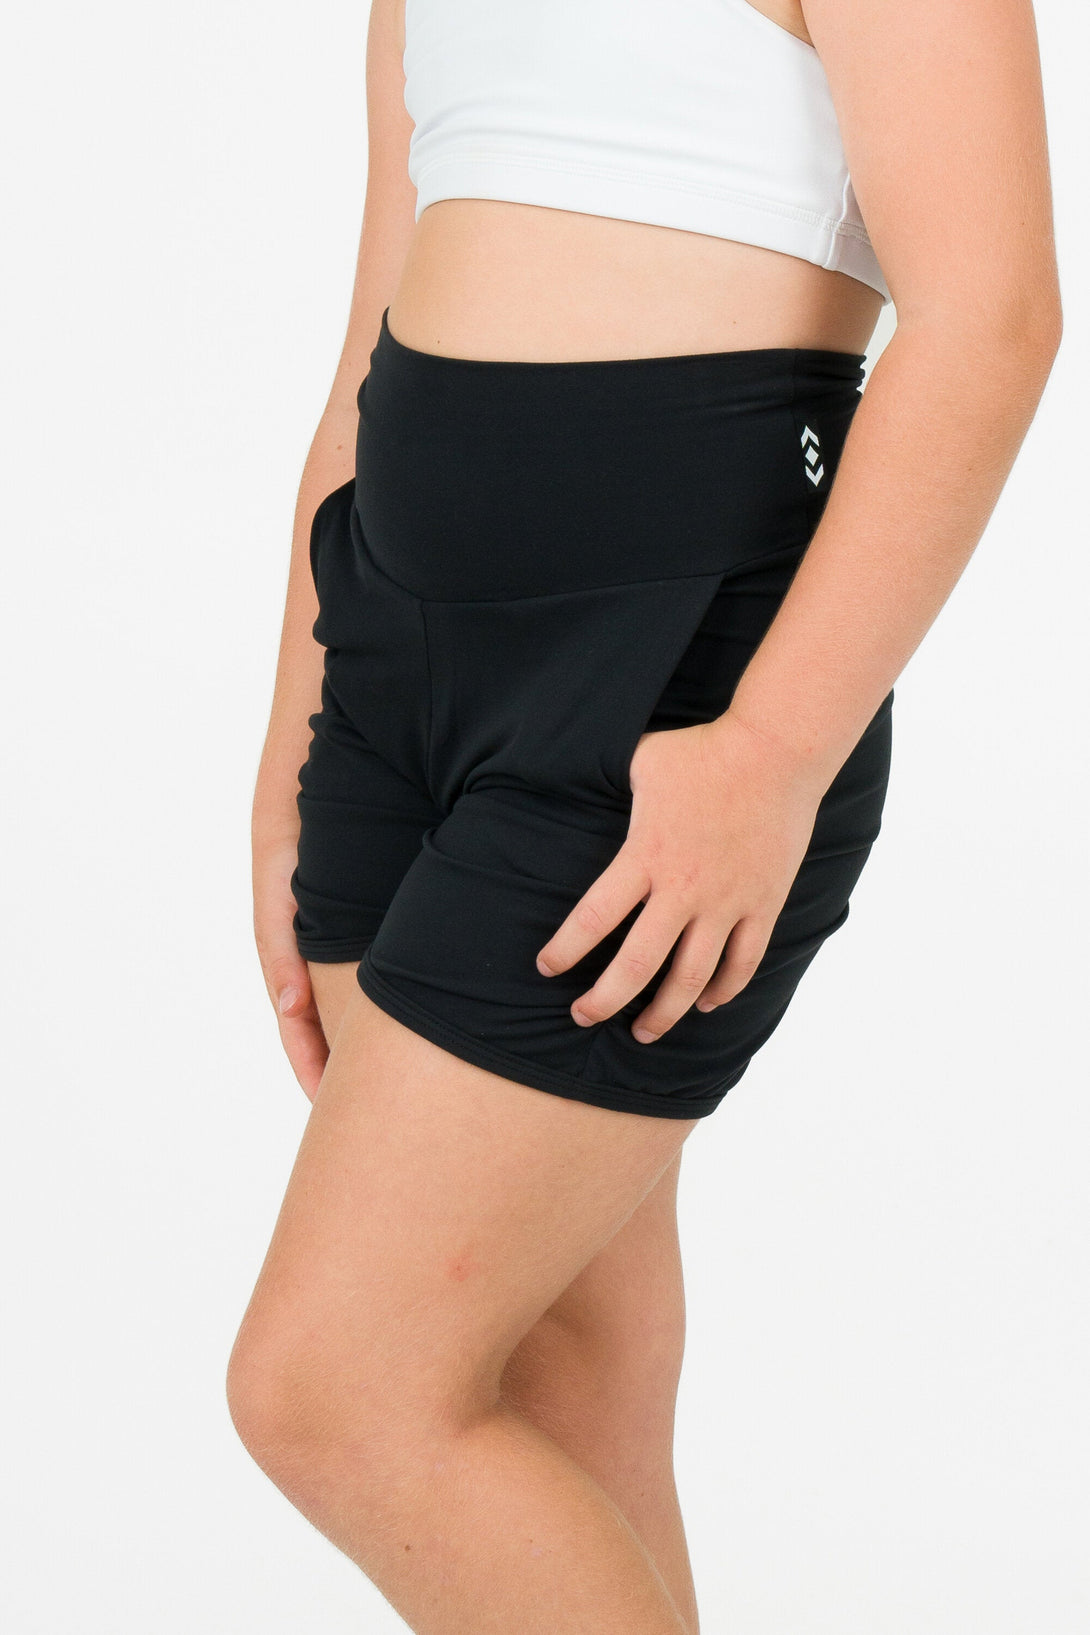 Black Soft To Touch - Kids Jogger Shorts-Activewear-Exoticathletica